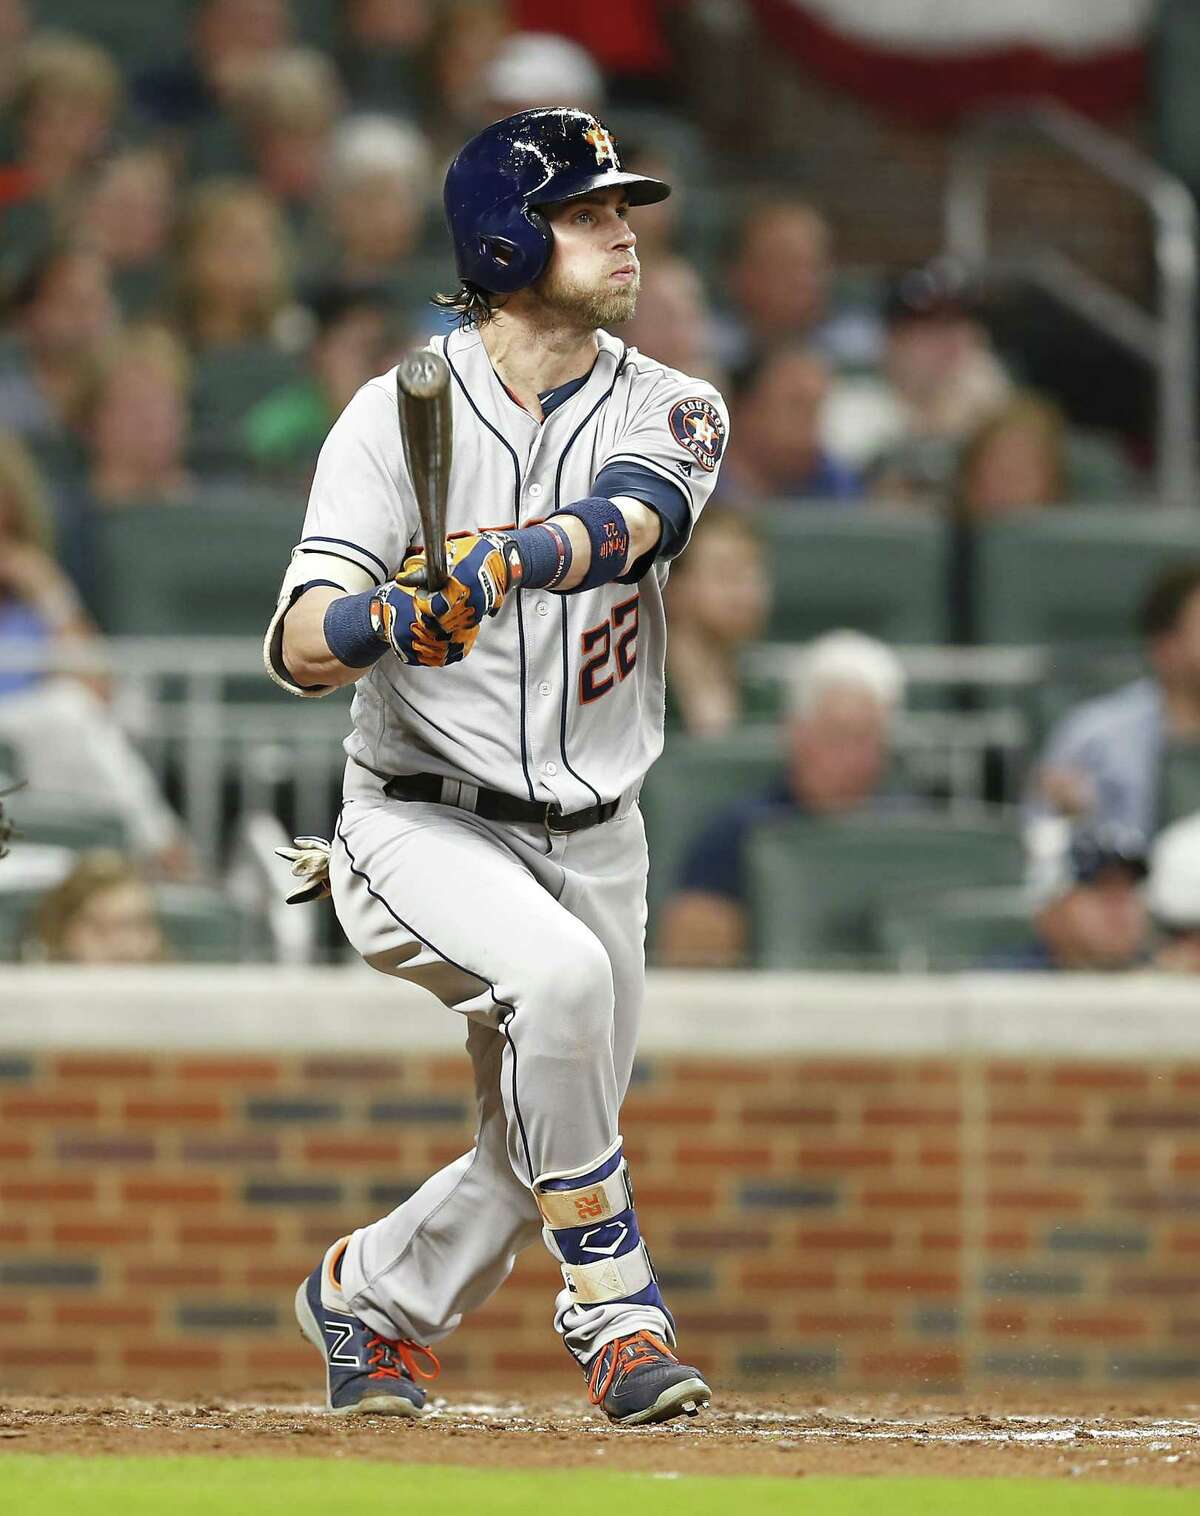 Josh Reddick launches a two-run double during the Astros' fifth inning Wednesday. He had seven RBIs in the two-game series.